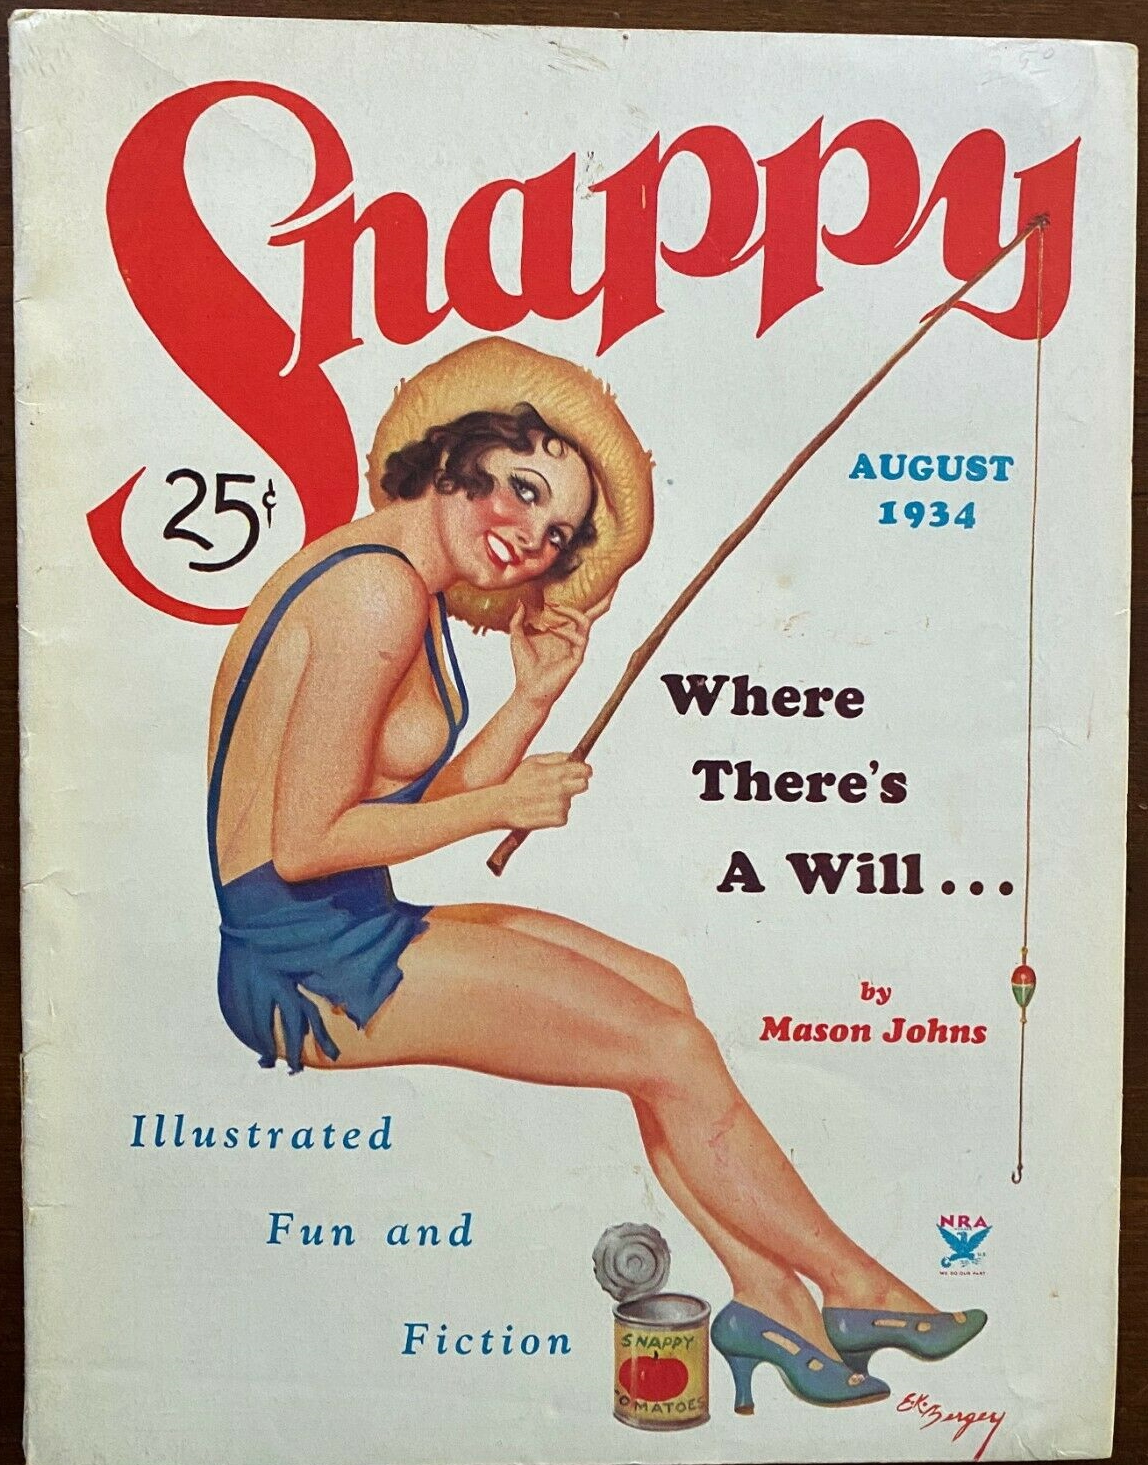 Snappy - August 1934